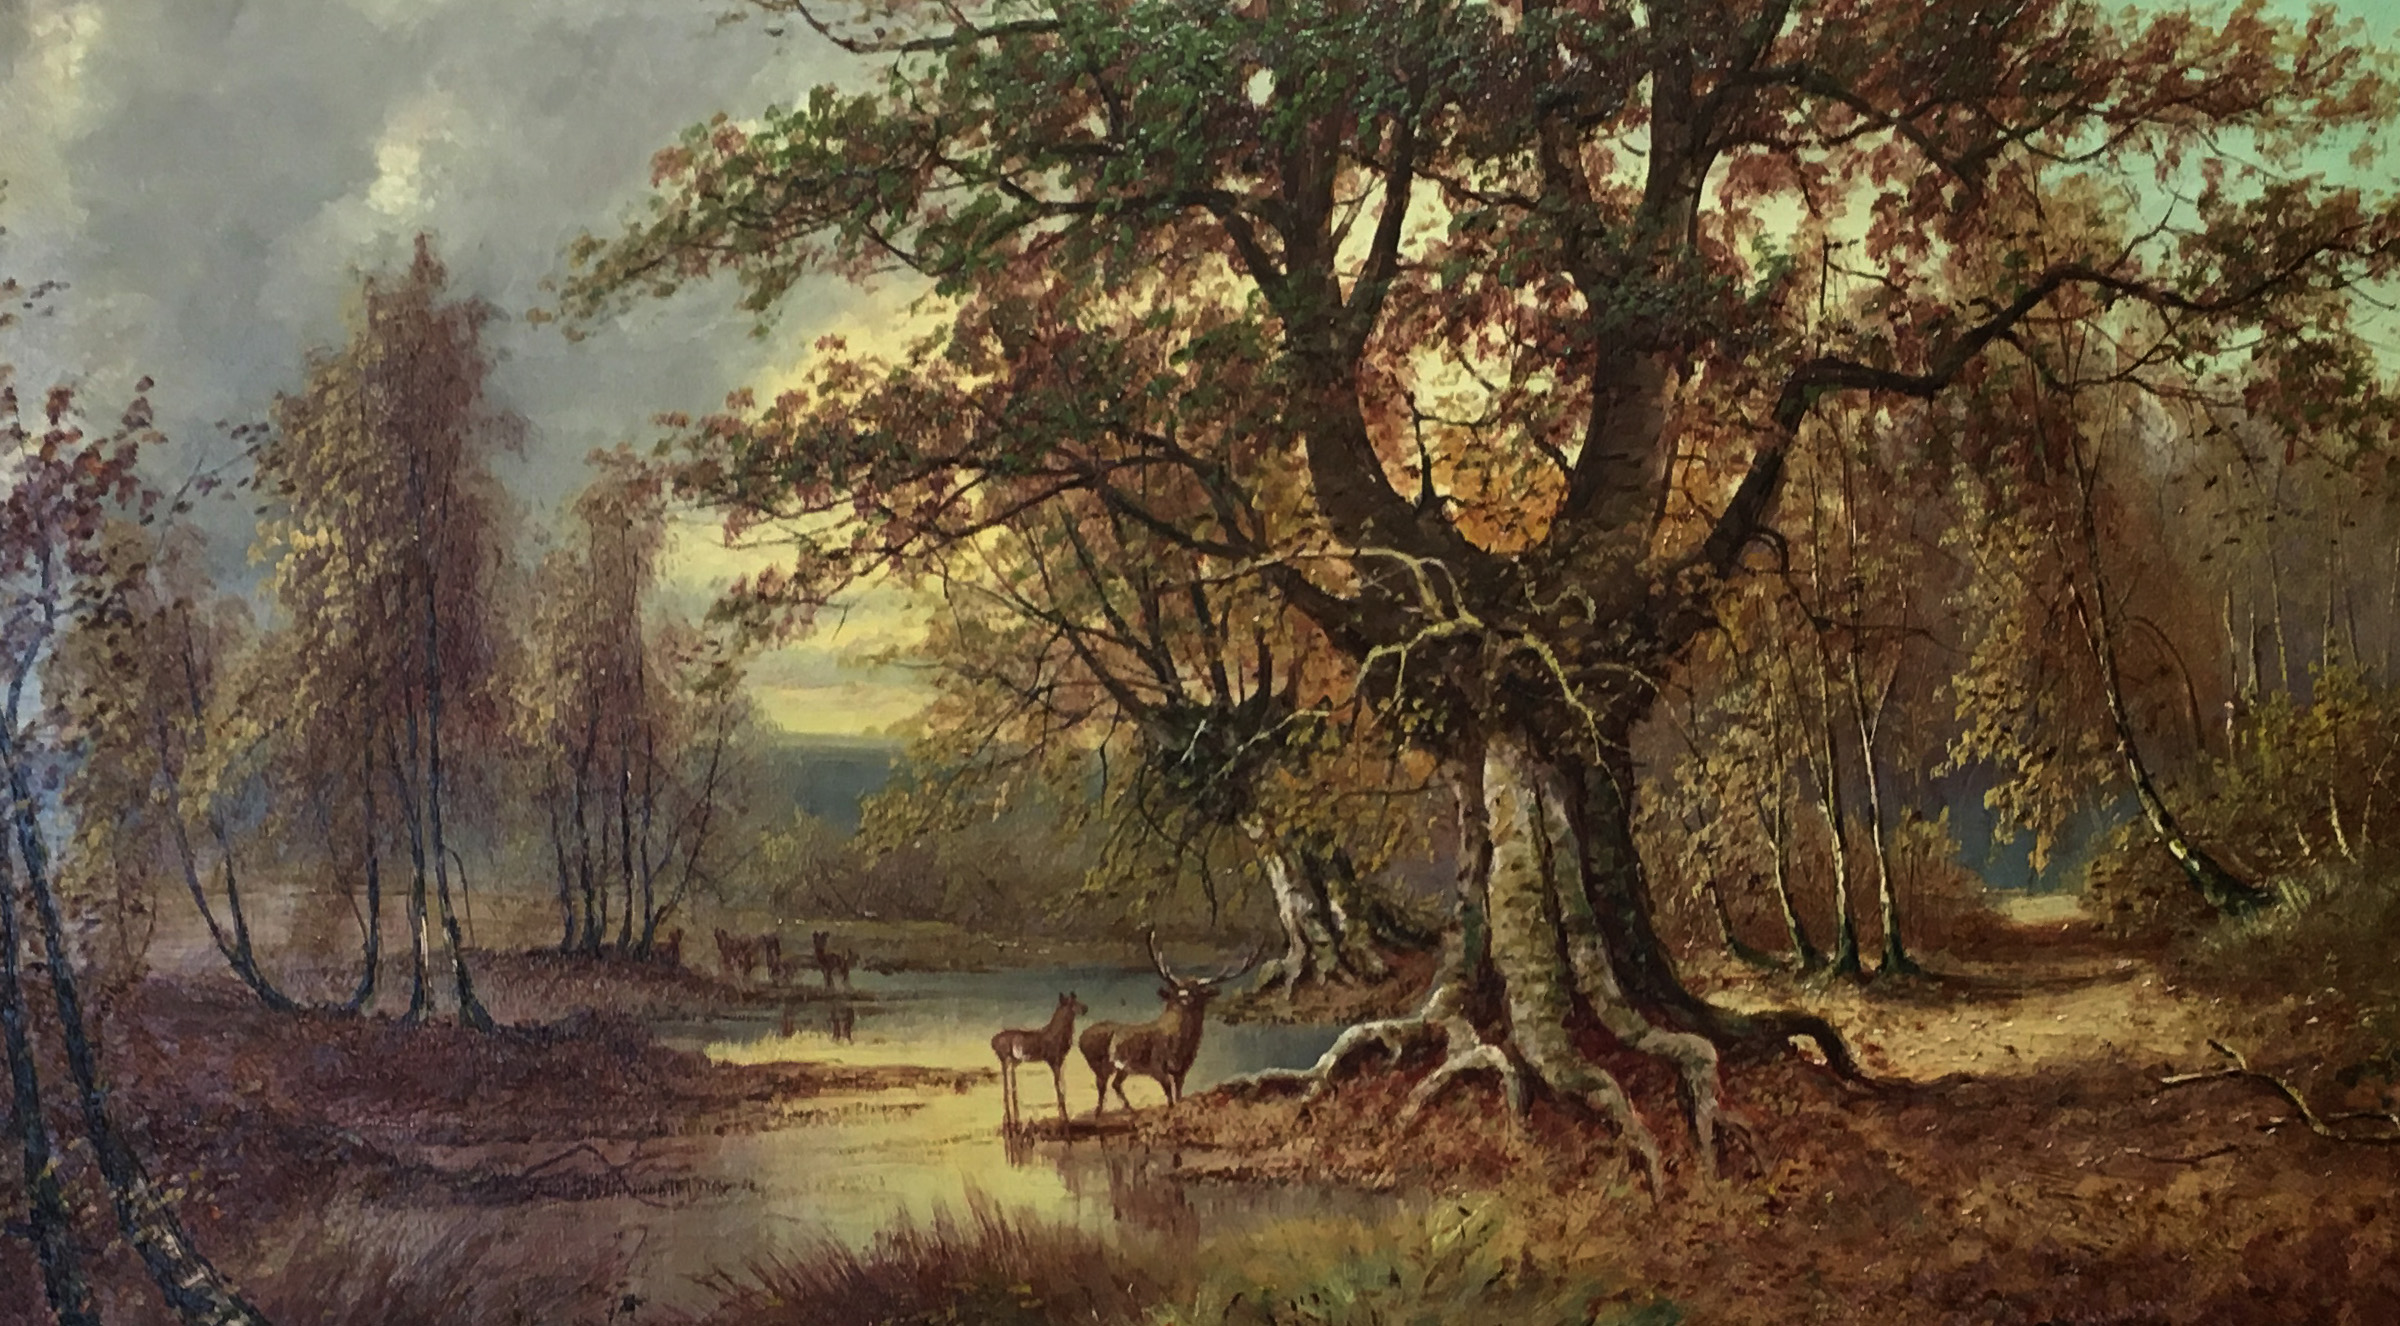 Painting of two deer, a lake, and a beautiful oak tree.  Symbolic of regional Appalachian landowners and our history of protecting trusts and estates from litigation.